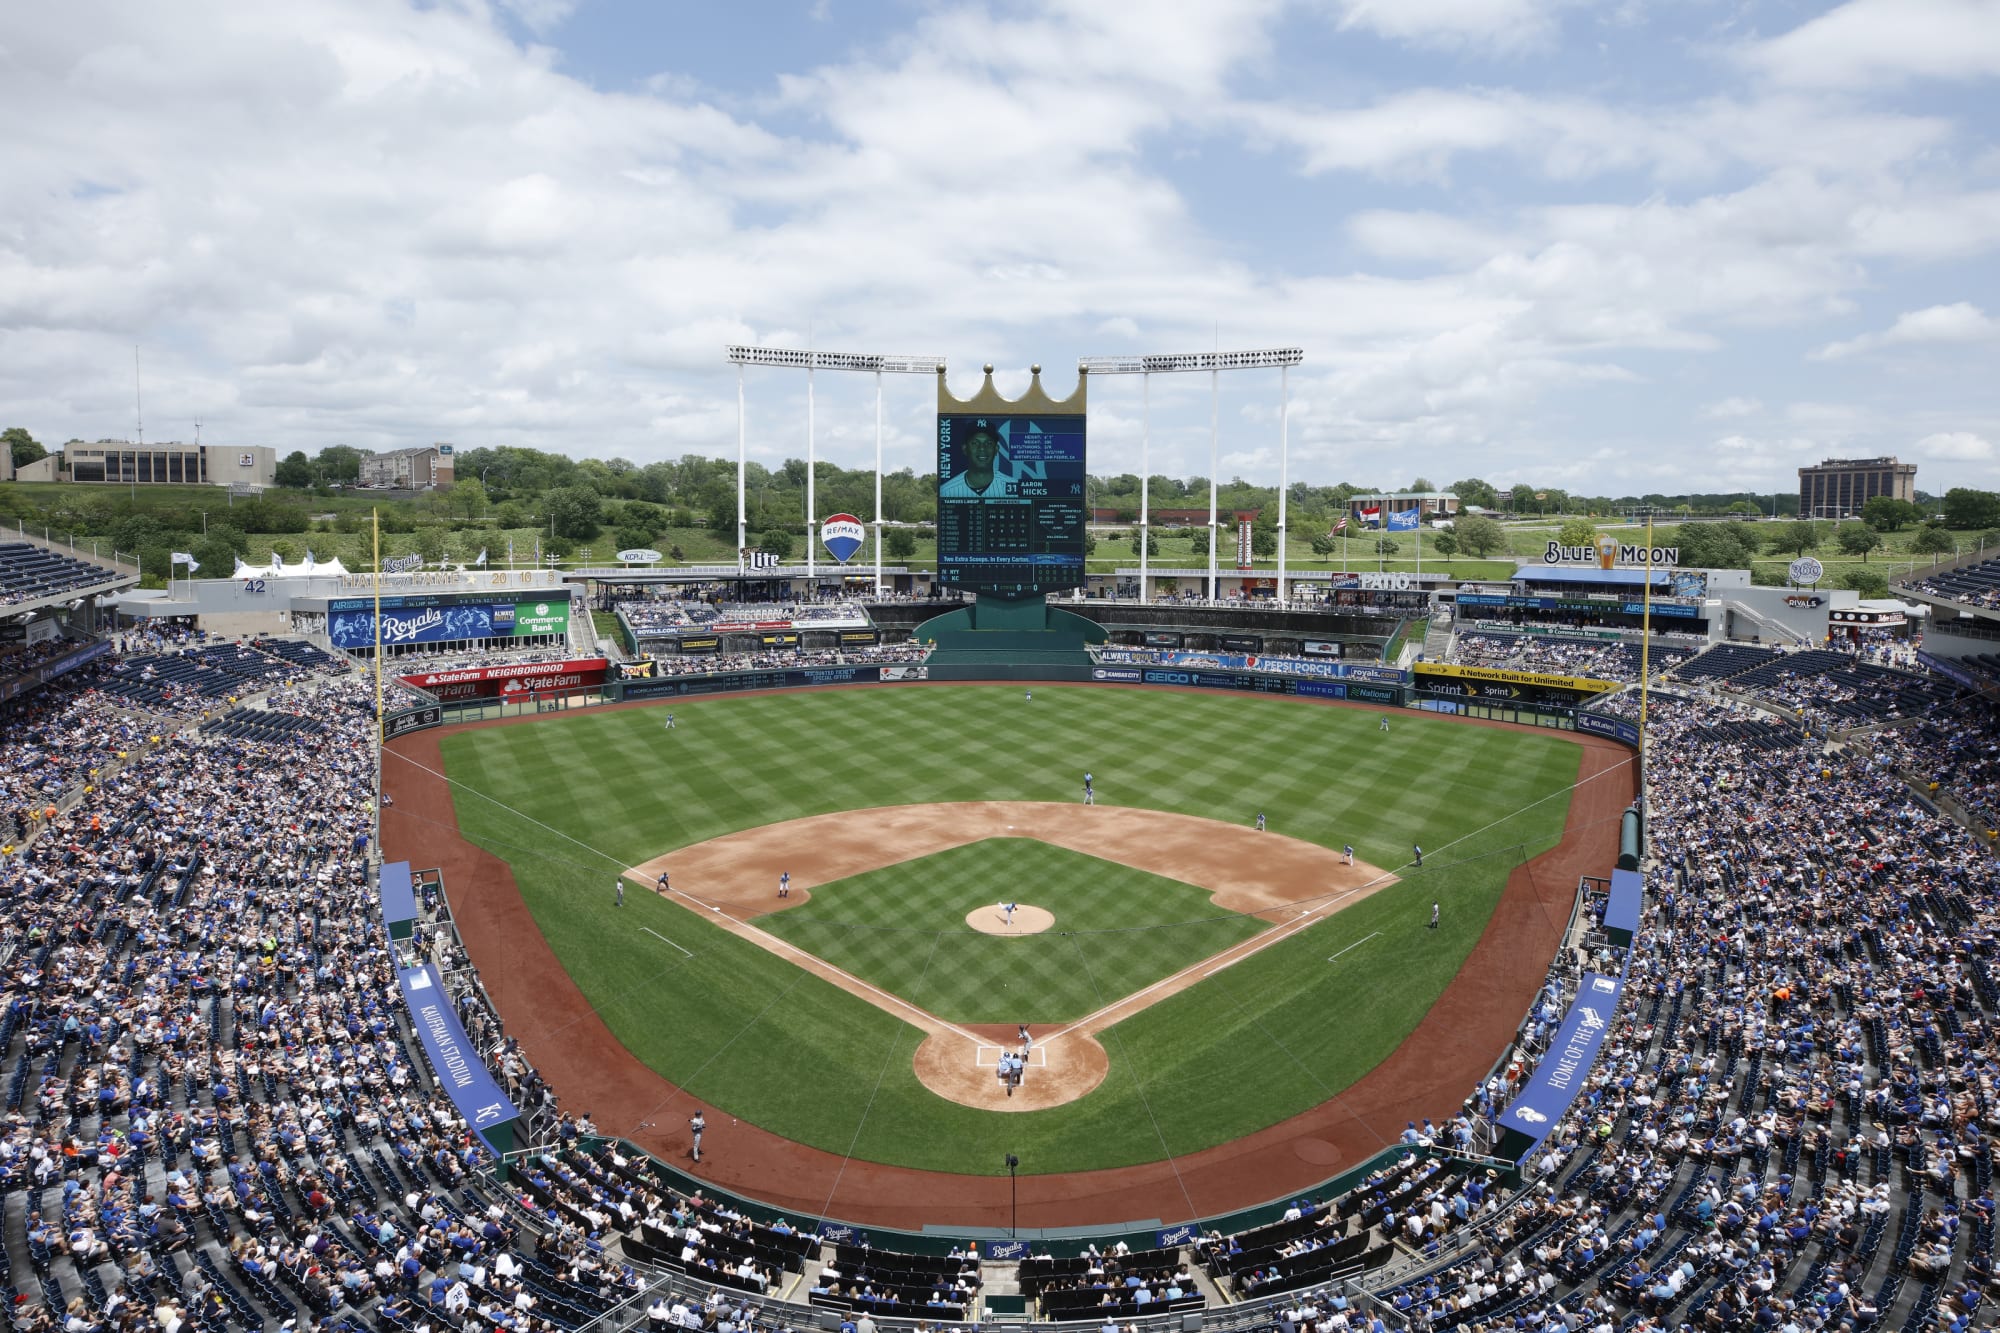 KC Royals Fans are but best to know the rules